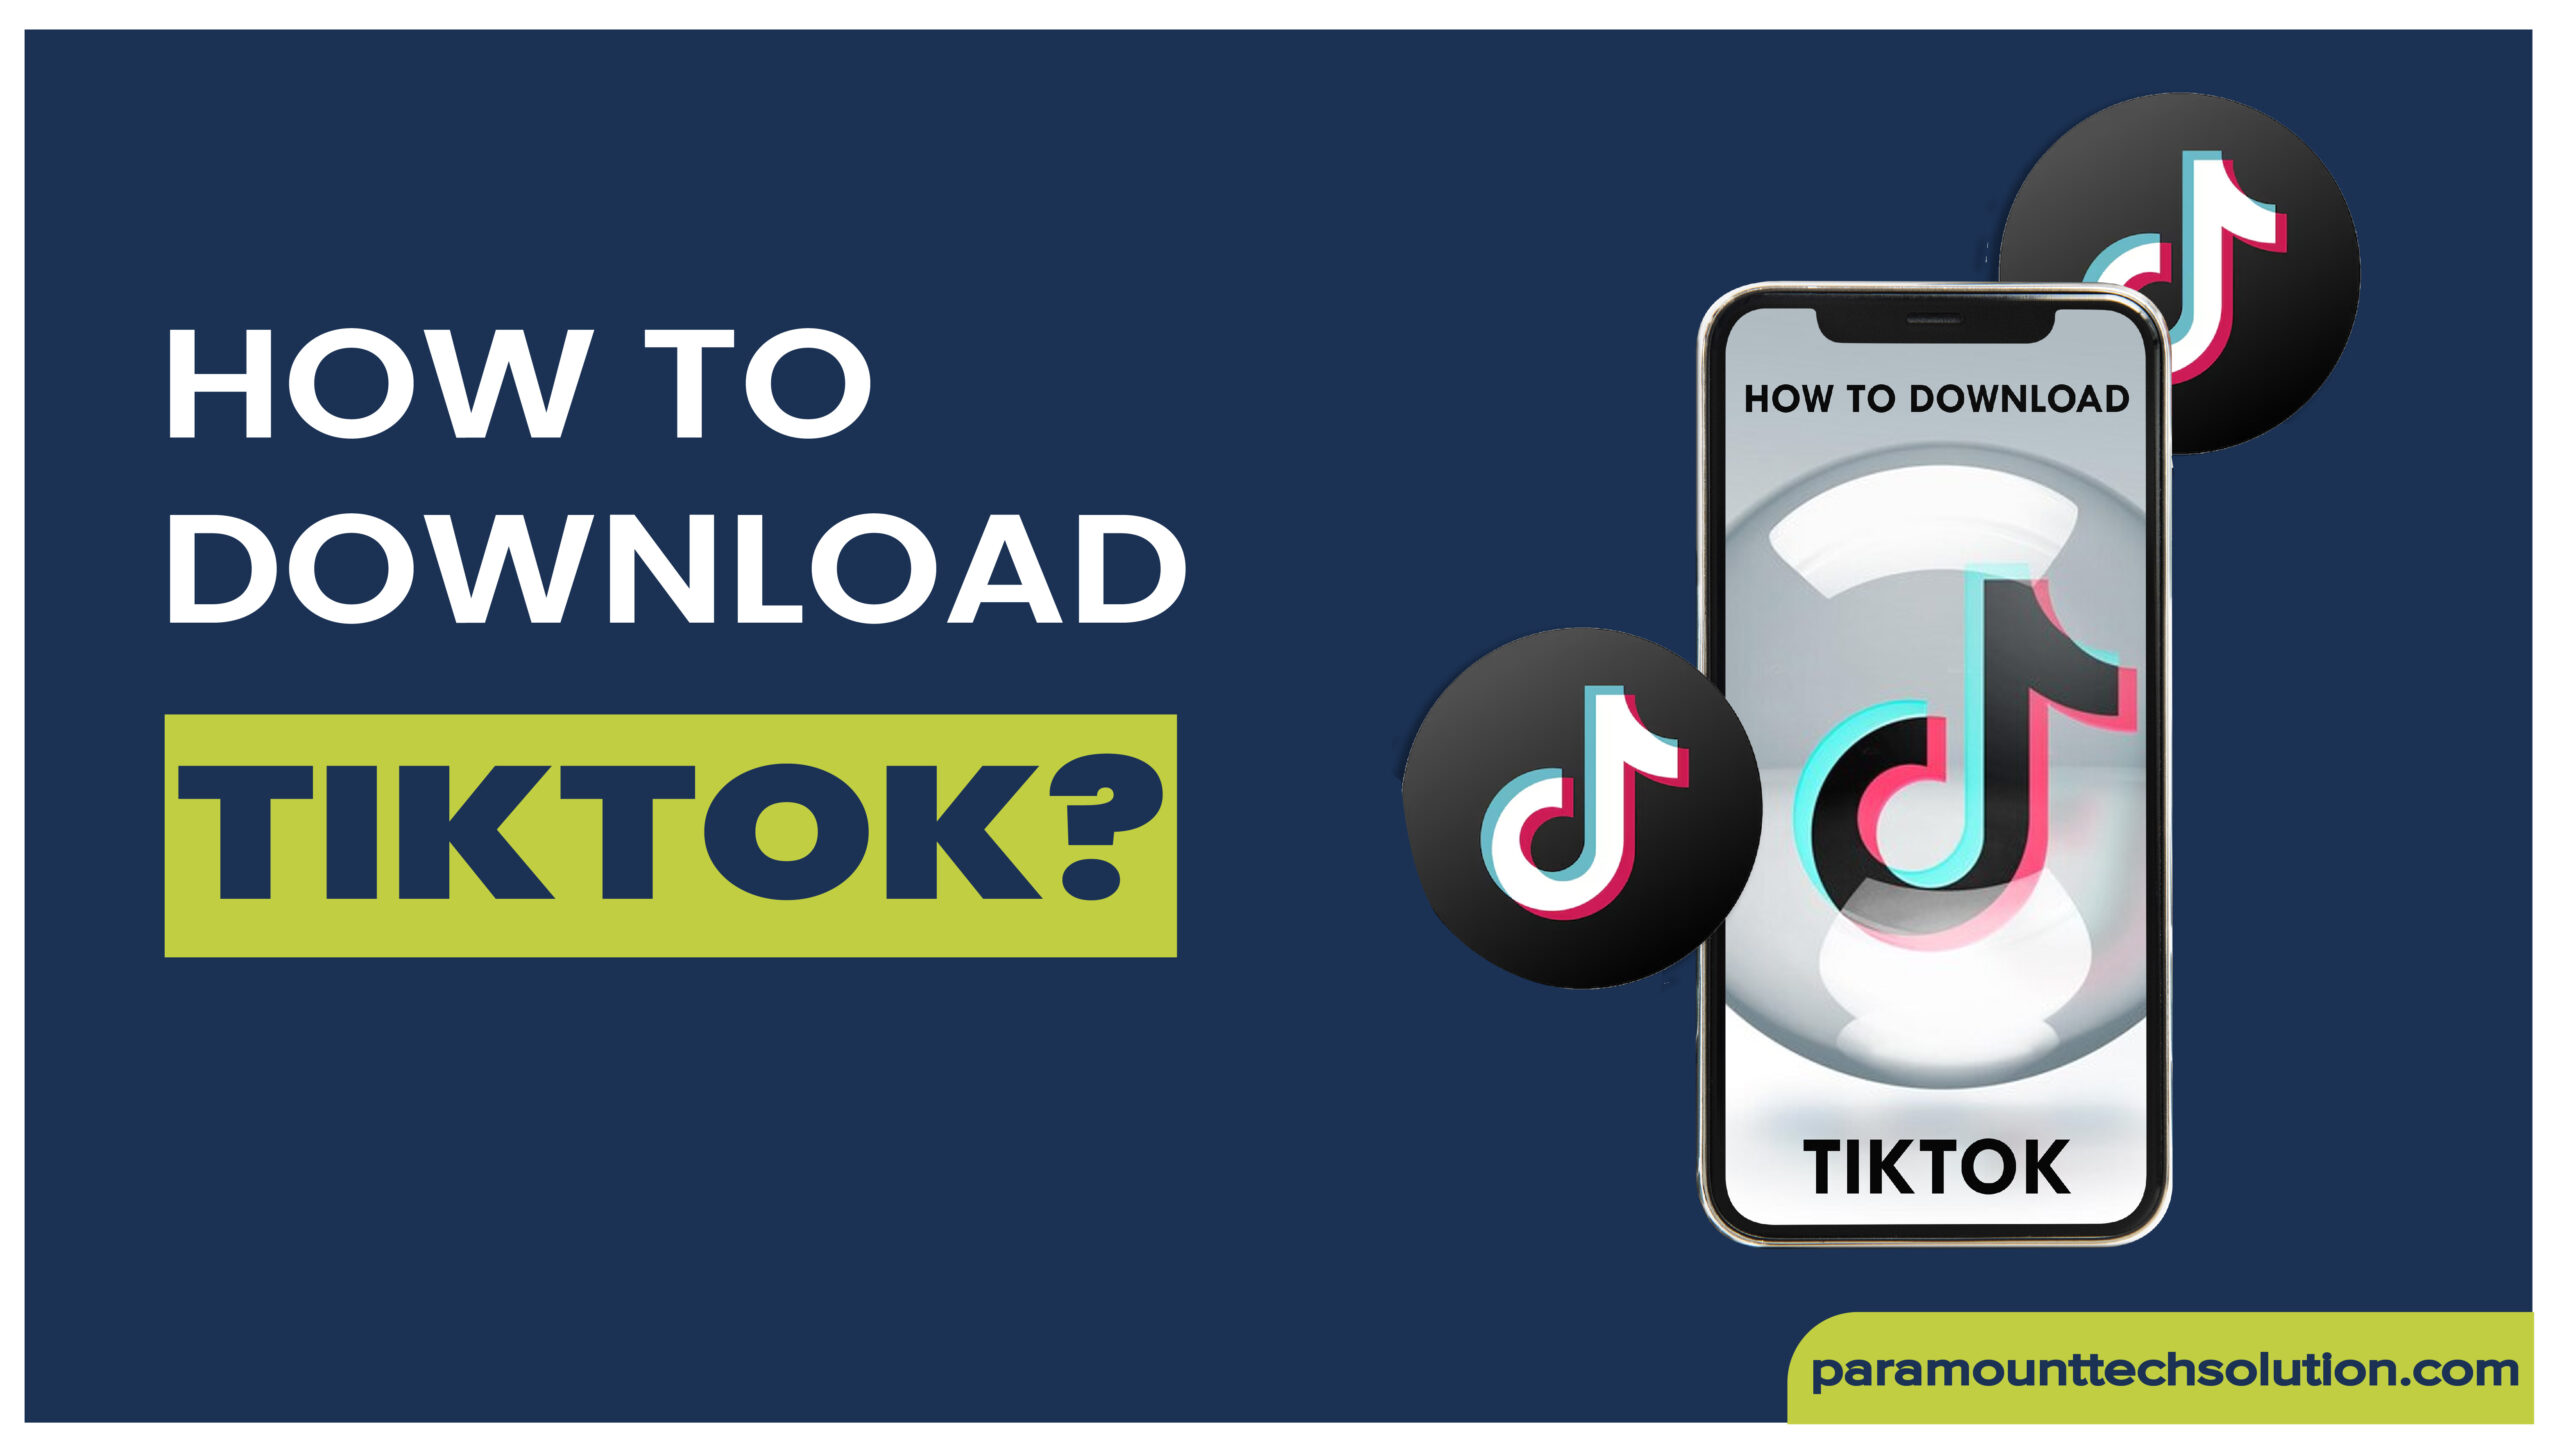 How to Perform Step-by-Step TikTok Video Download for Free or TikTok WaterMark Remover App